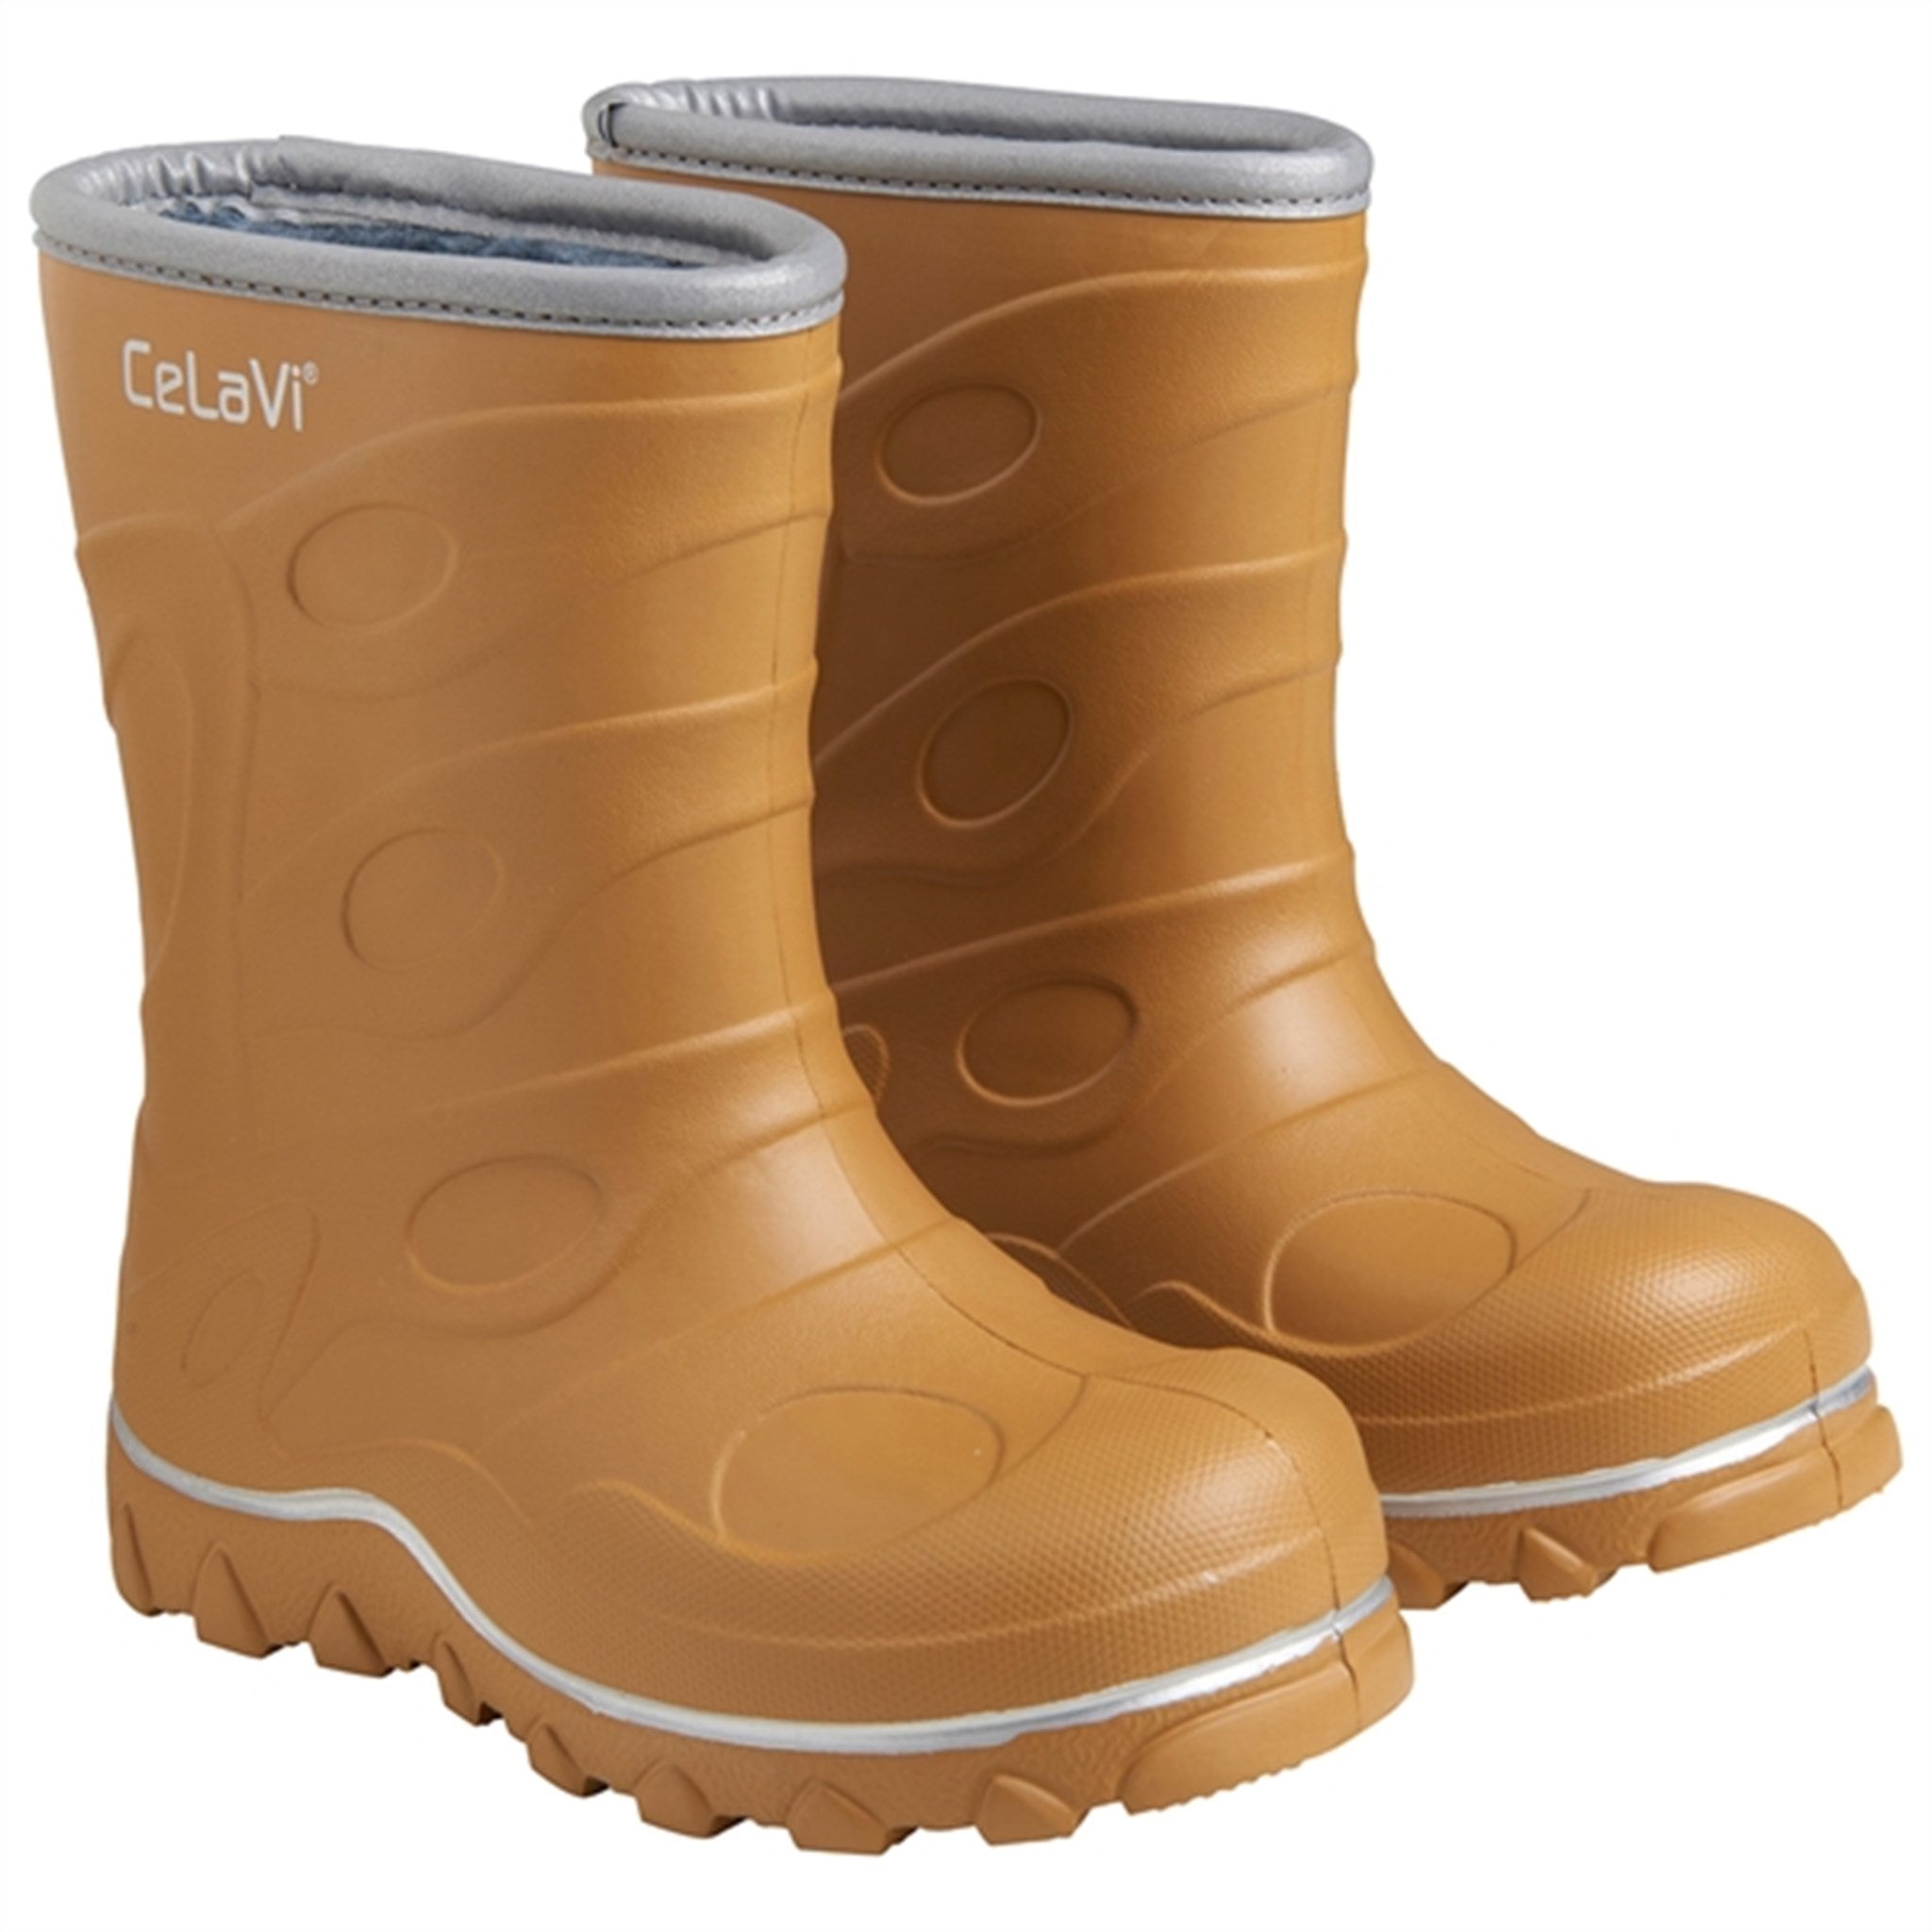 Celavi Thermo Boots Buckthorn Brown